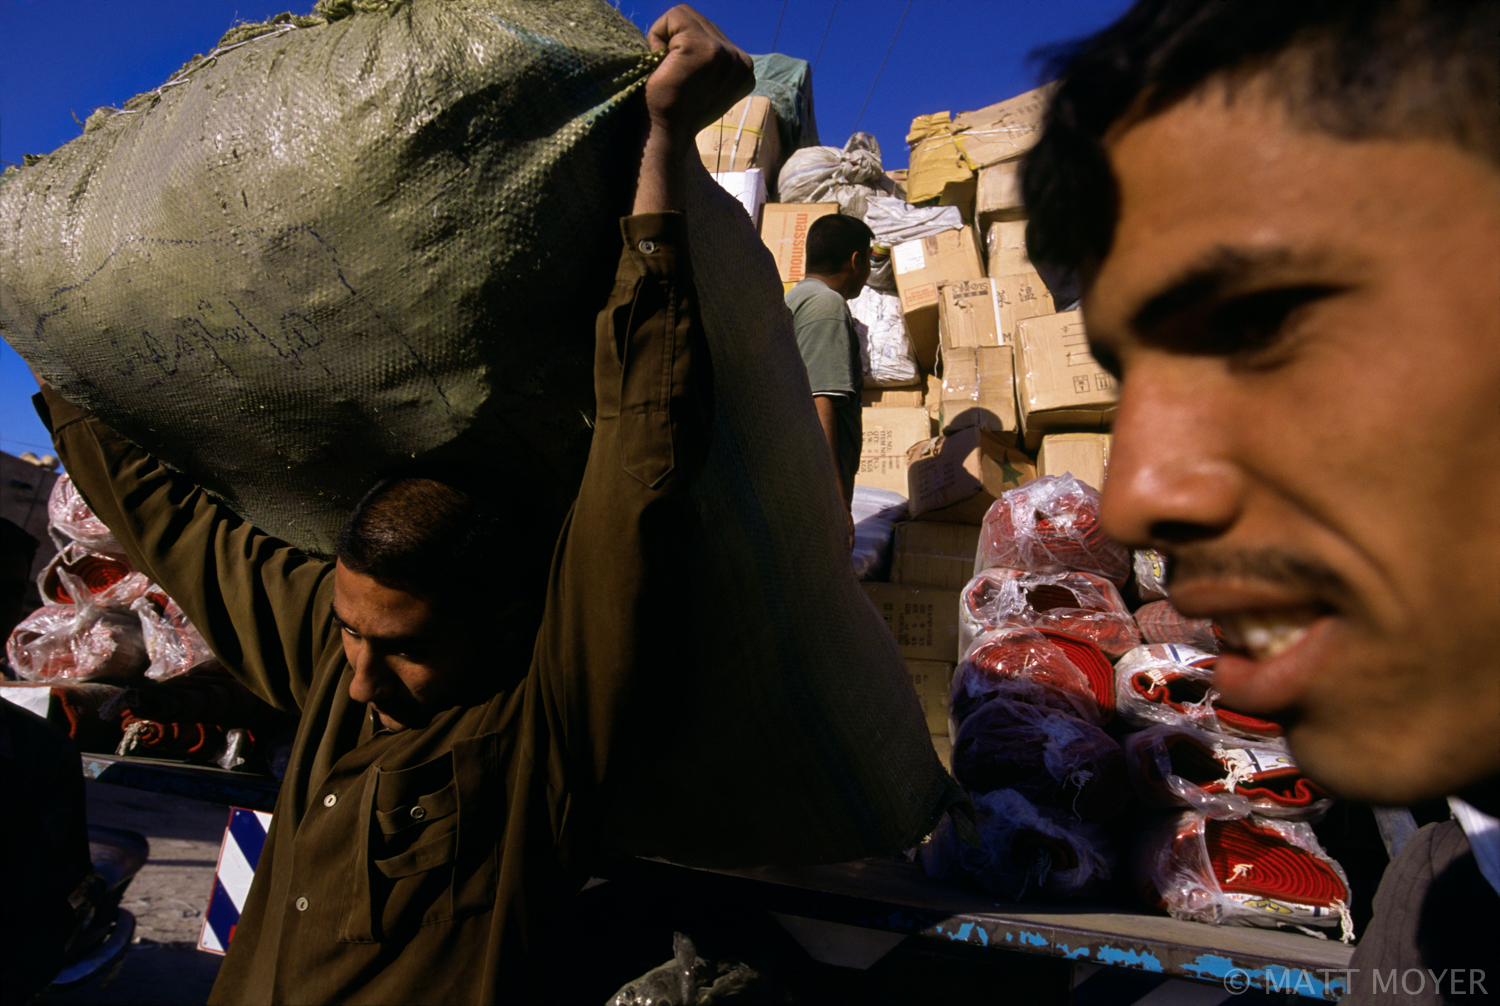  Goods are unloaded from a truck in Najaf, Iraq. 